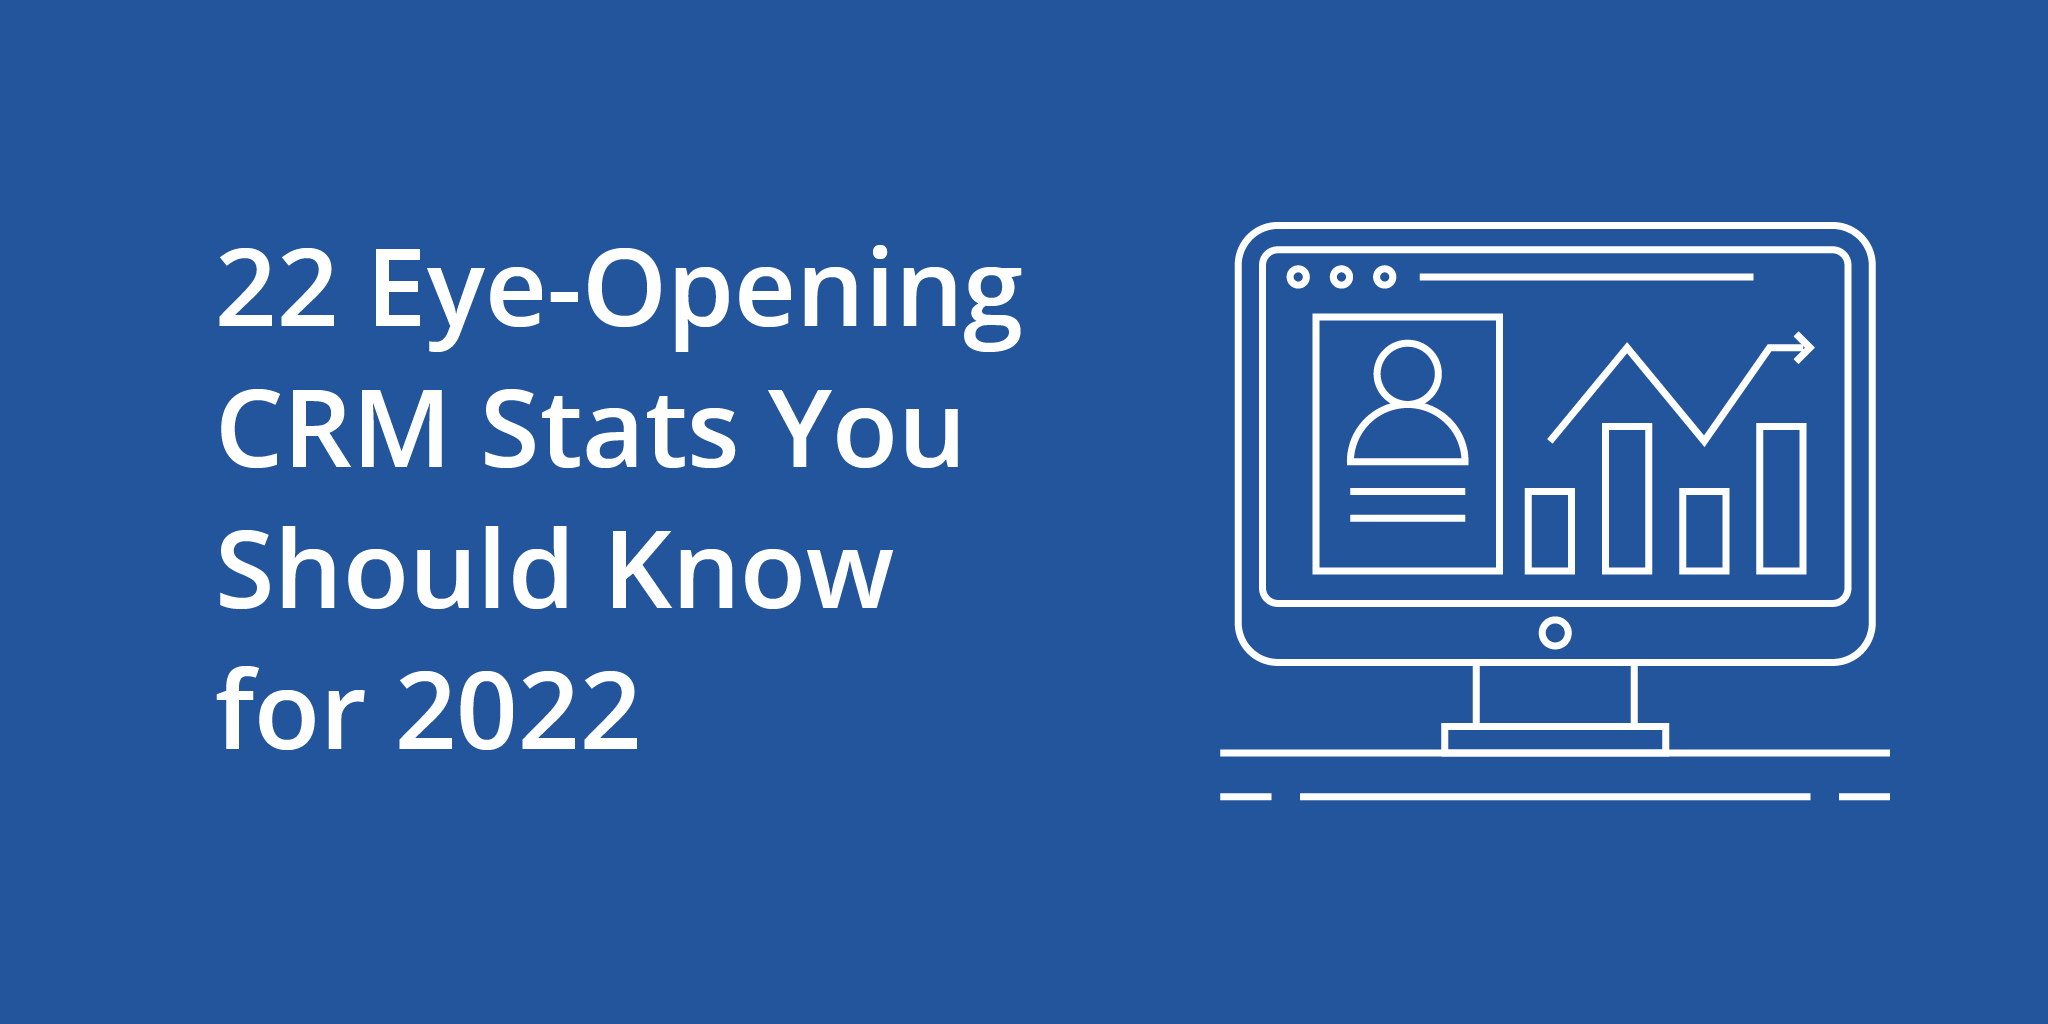 22 Eye-Opening CRM Stats You Should Know for 2022 | Telephones for business